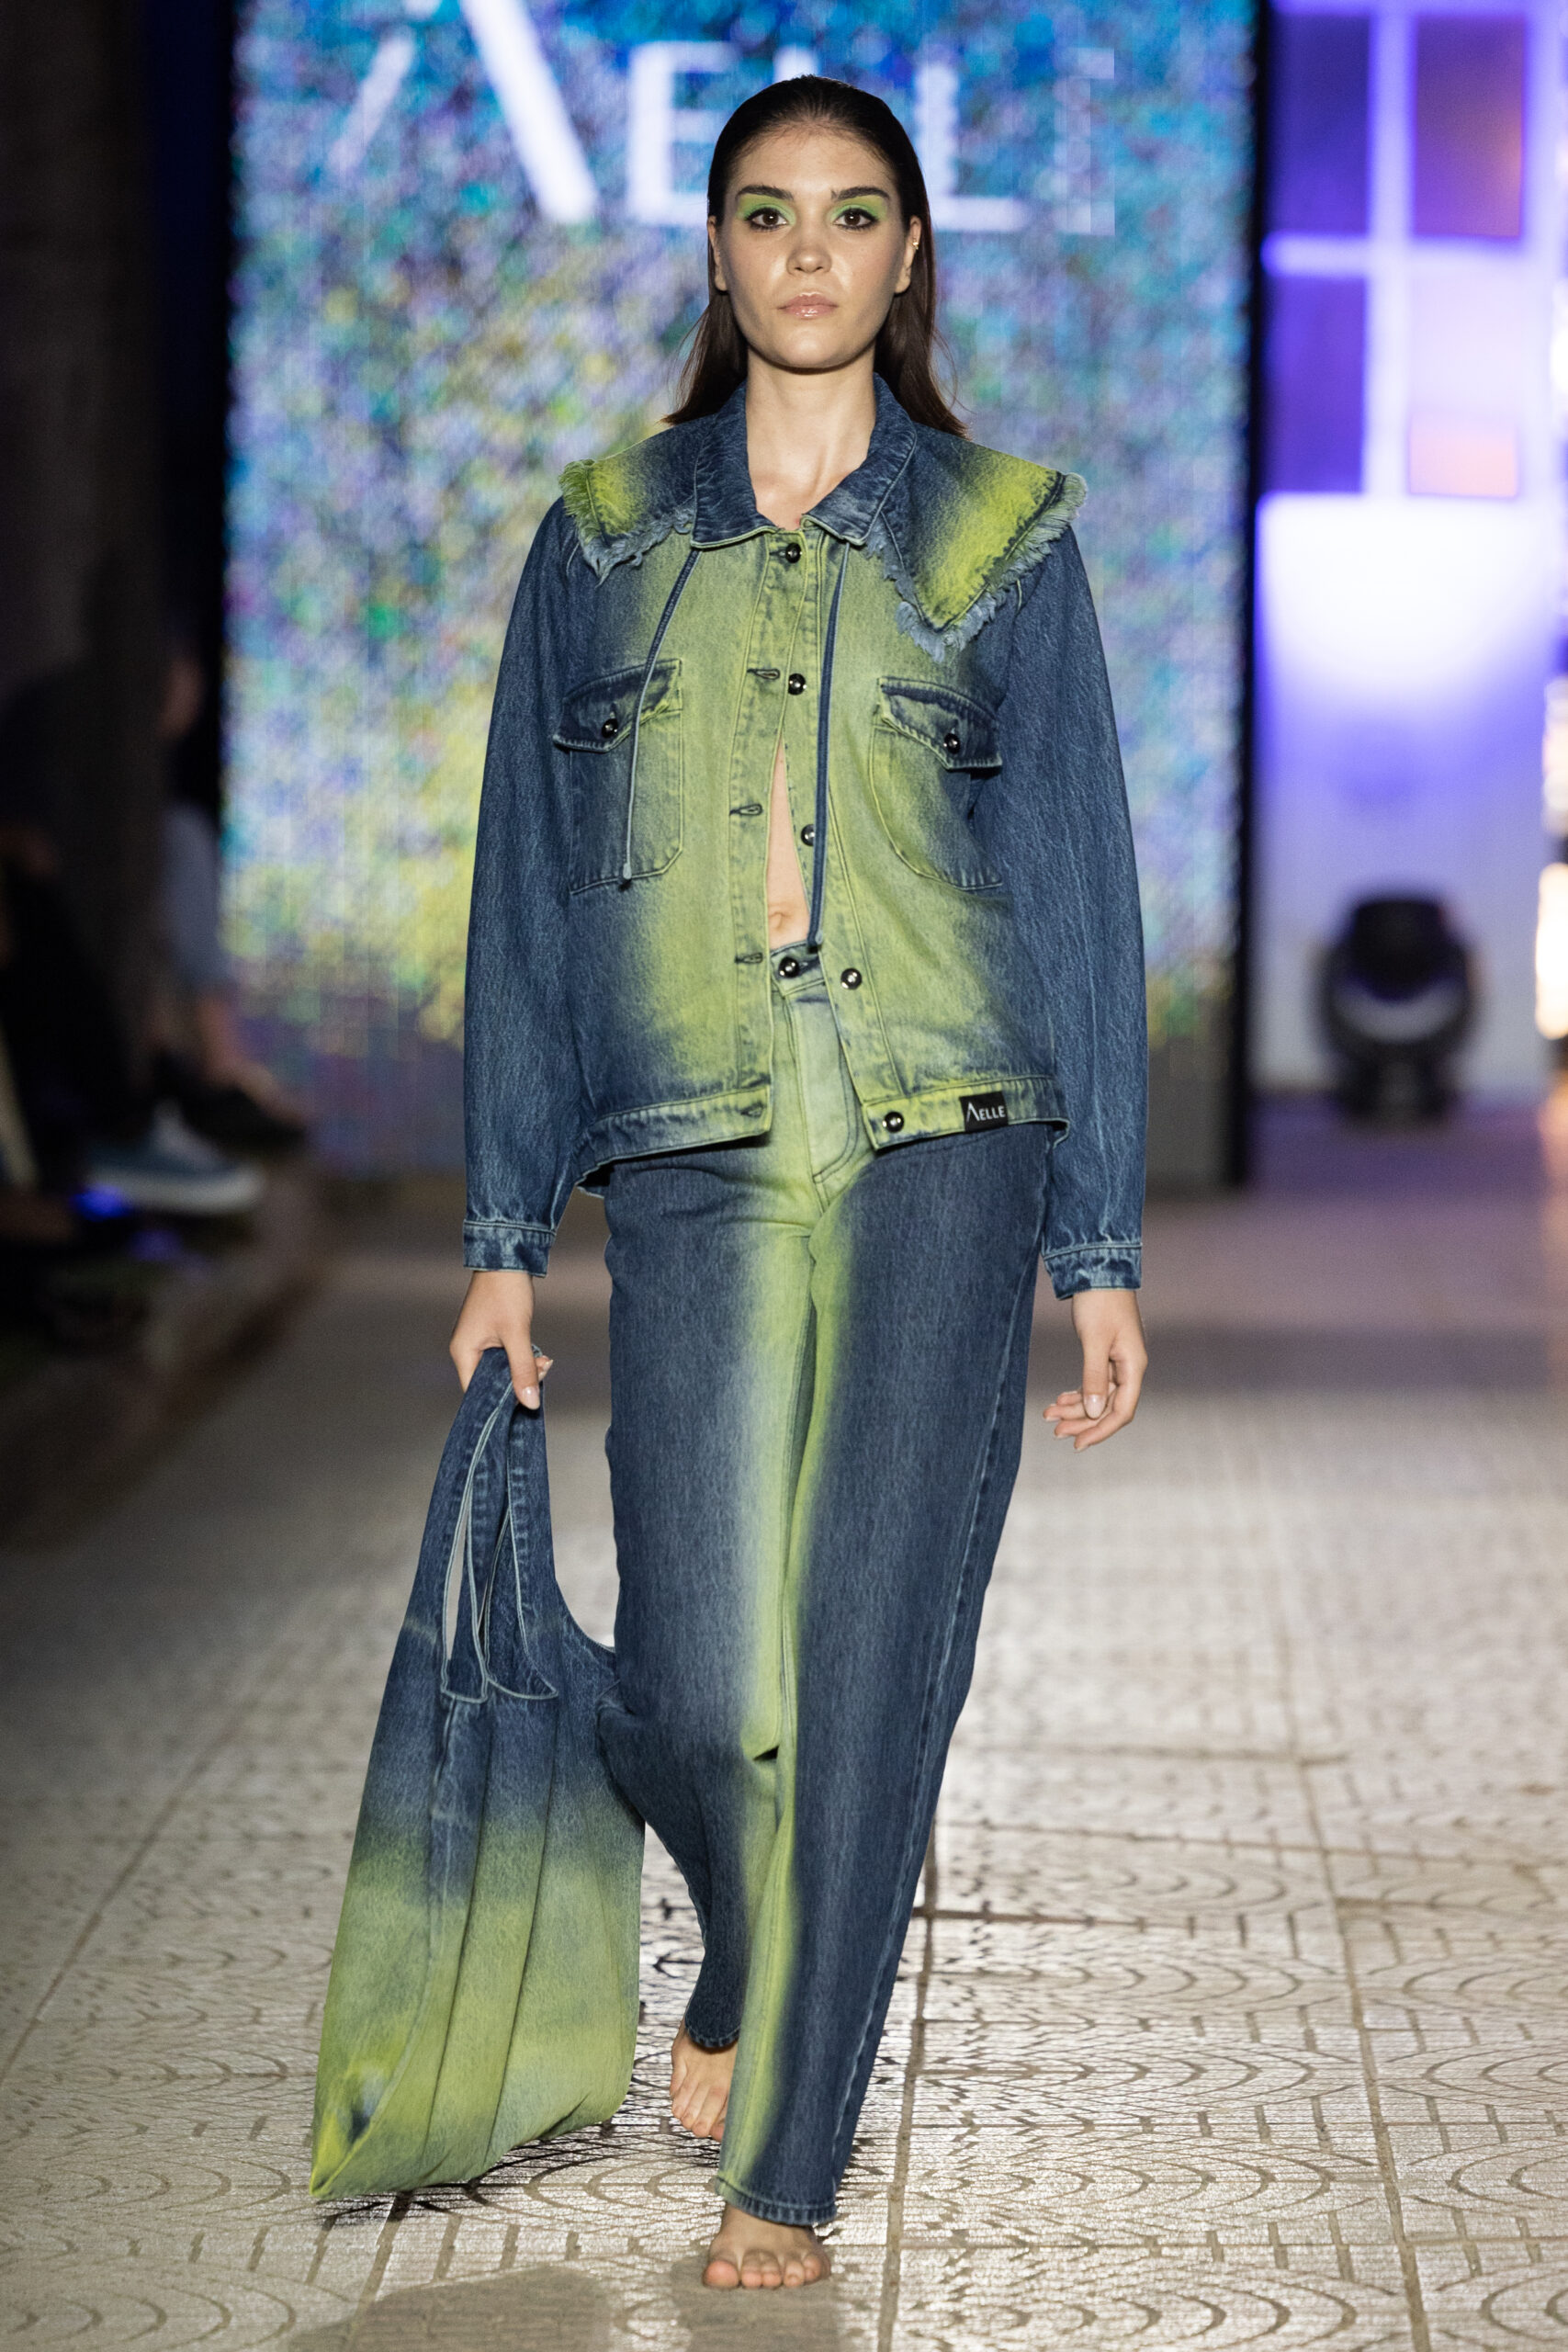 the fashion propellant - Altaroma - Rome is my runway 3 - Aelle 1